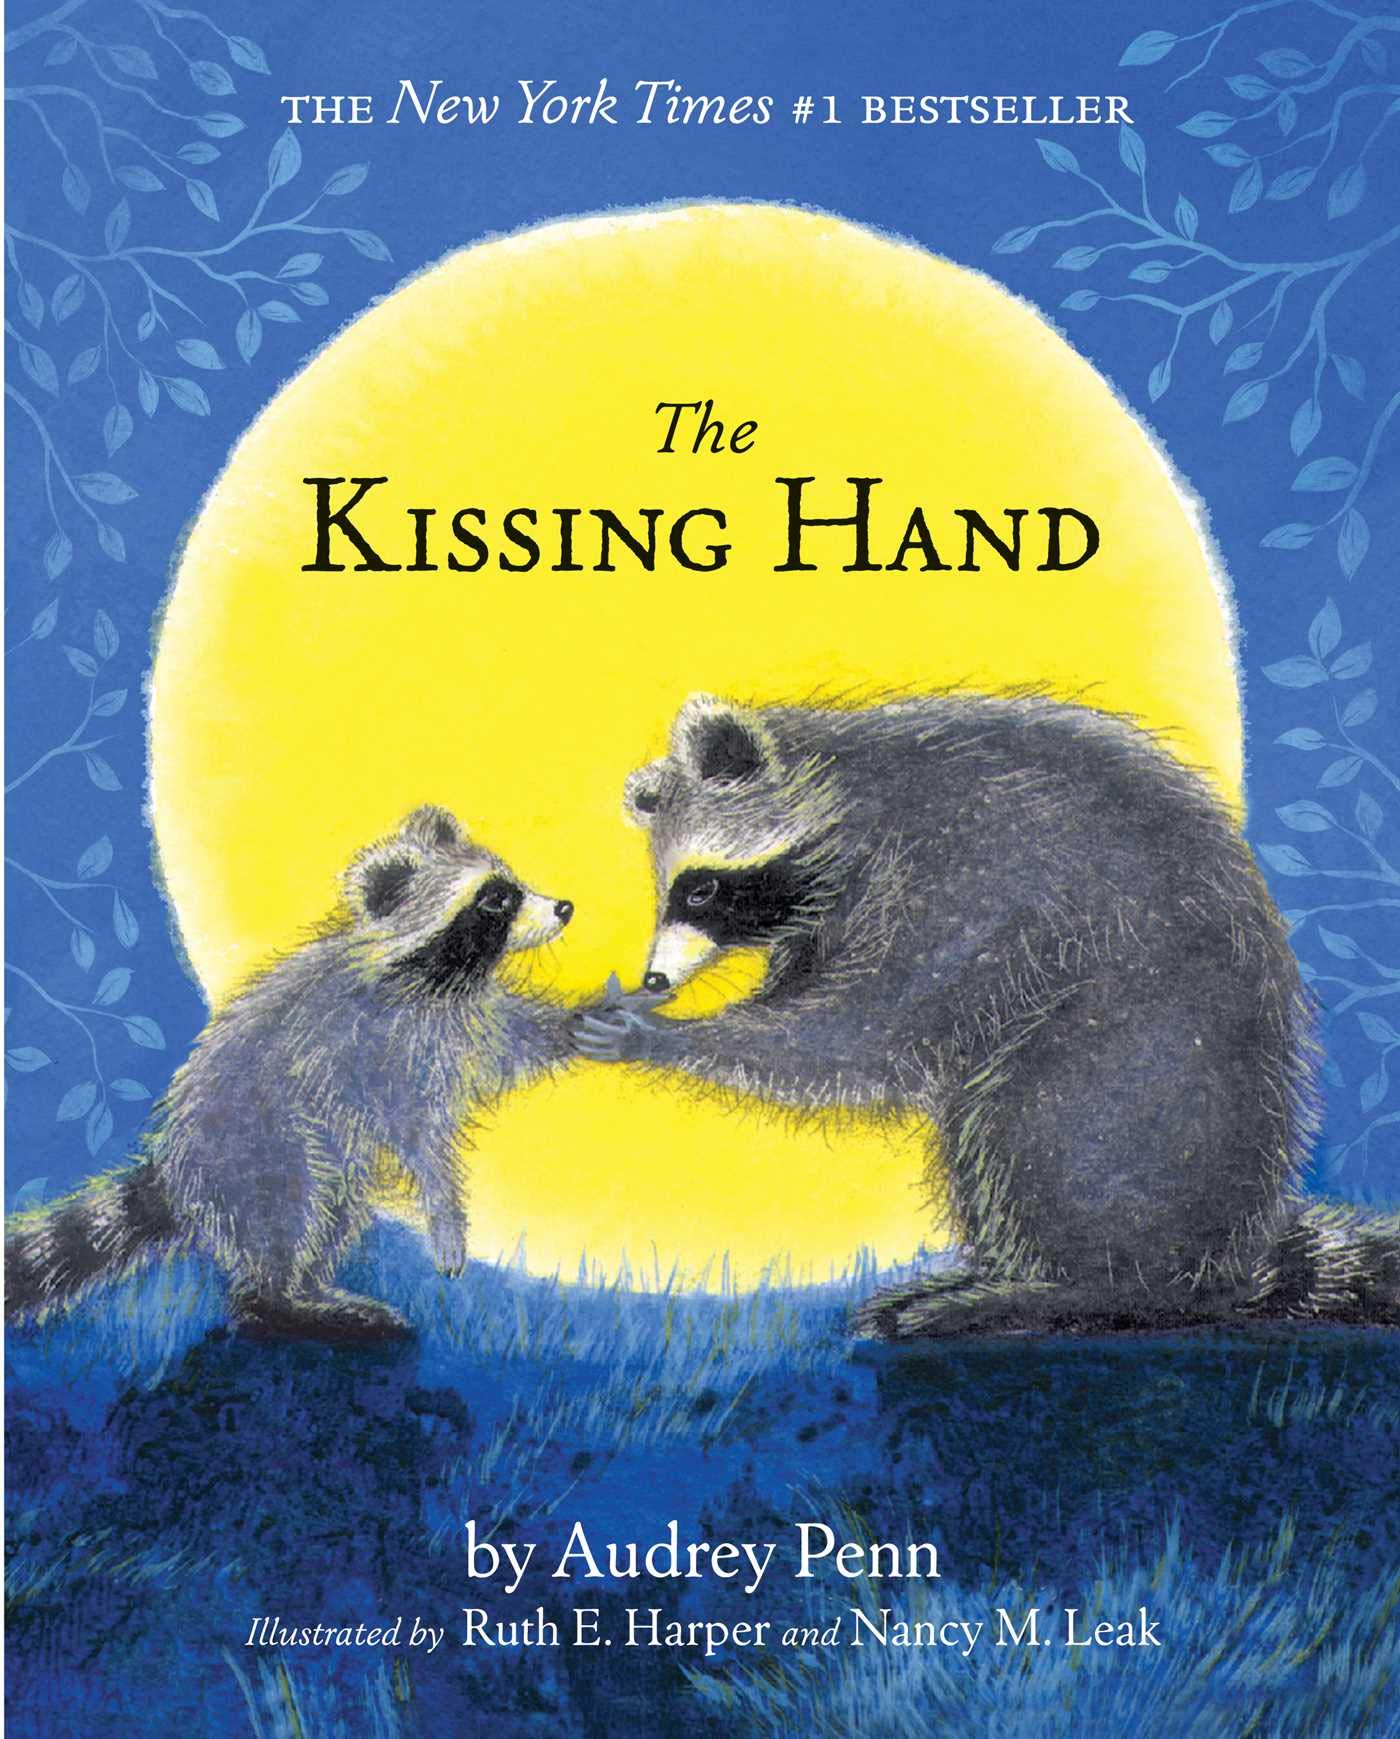 Image of "The Kissing Hand"